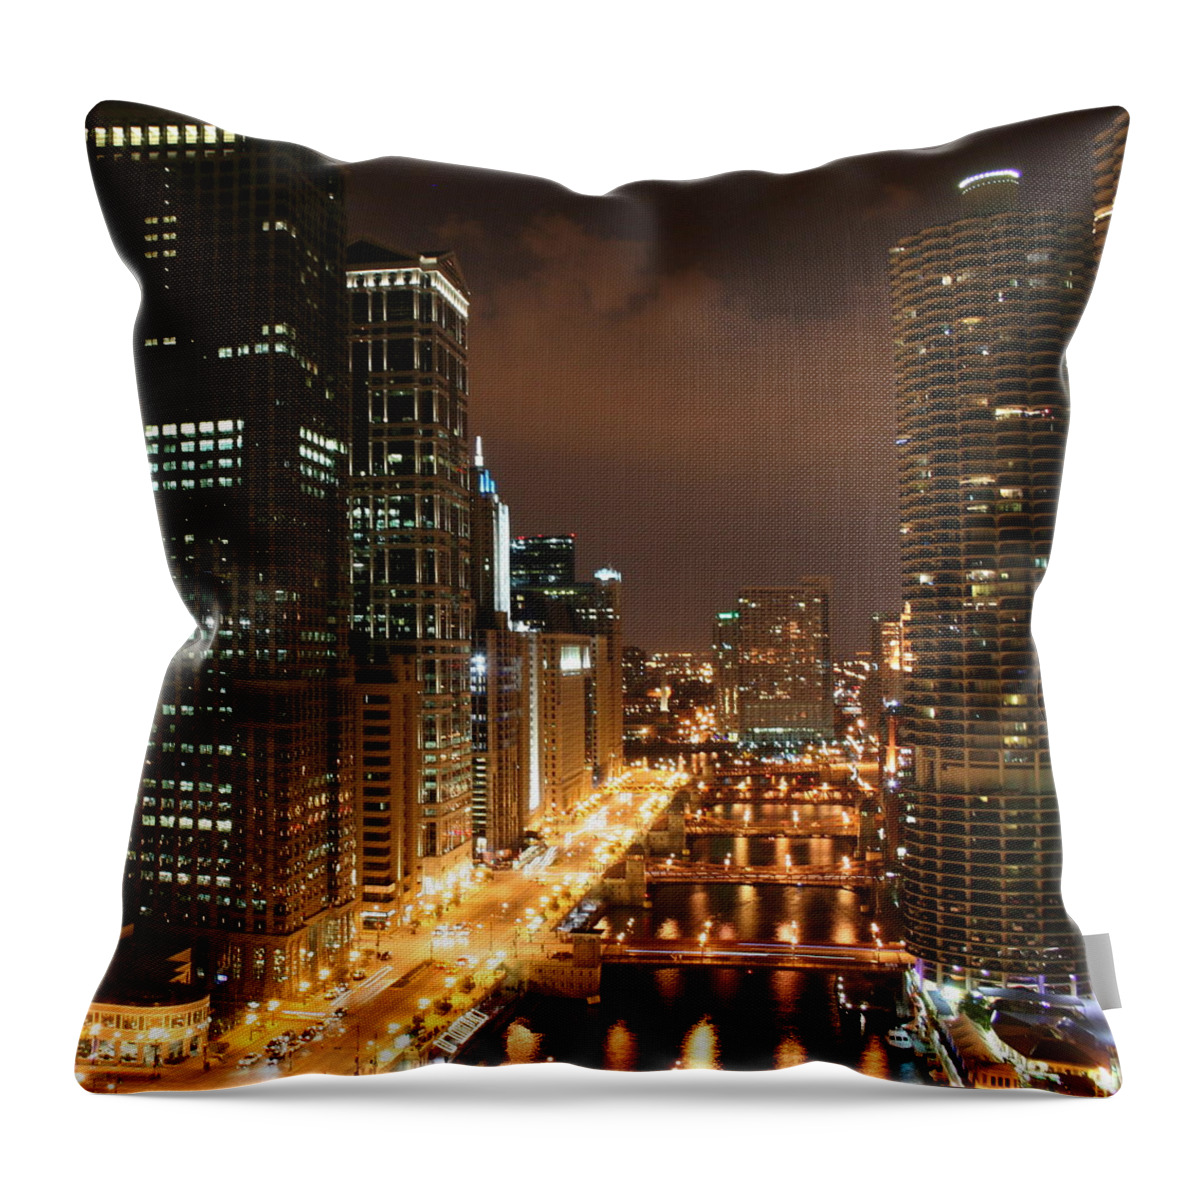 Cityscape Throw Pillow featuring the photograph Big City Lights by Julie Lueders 